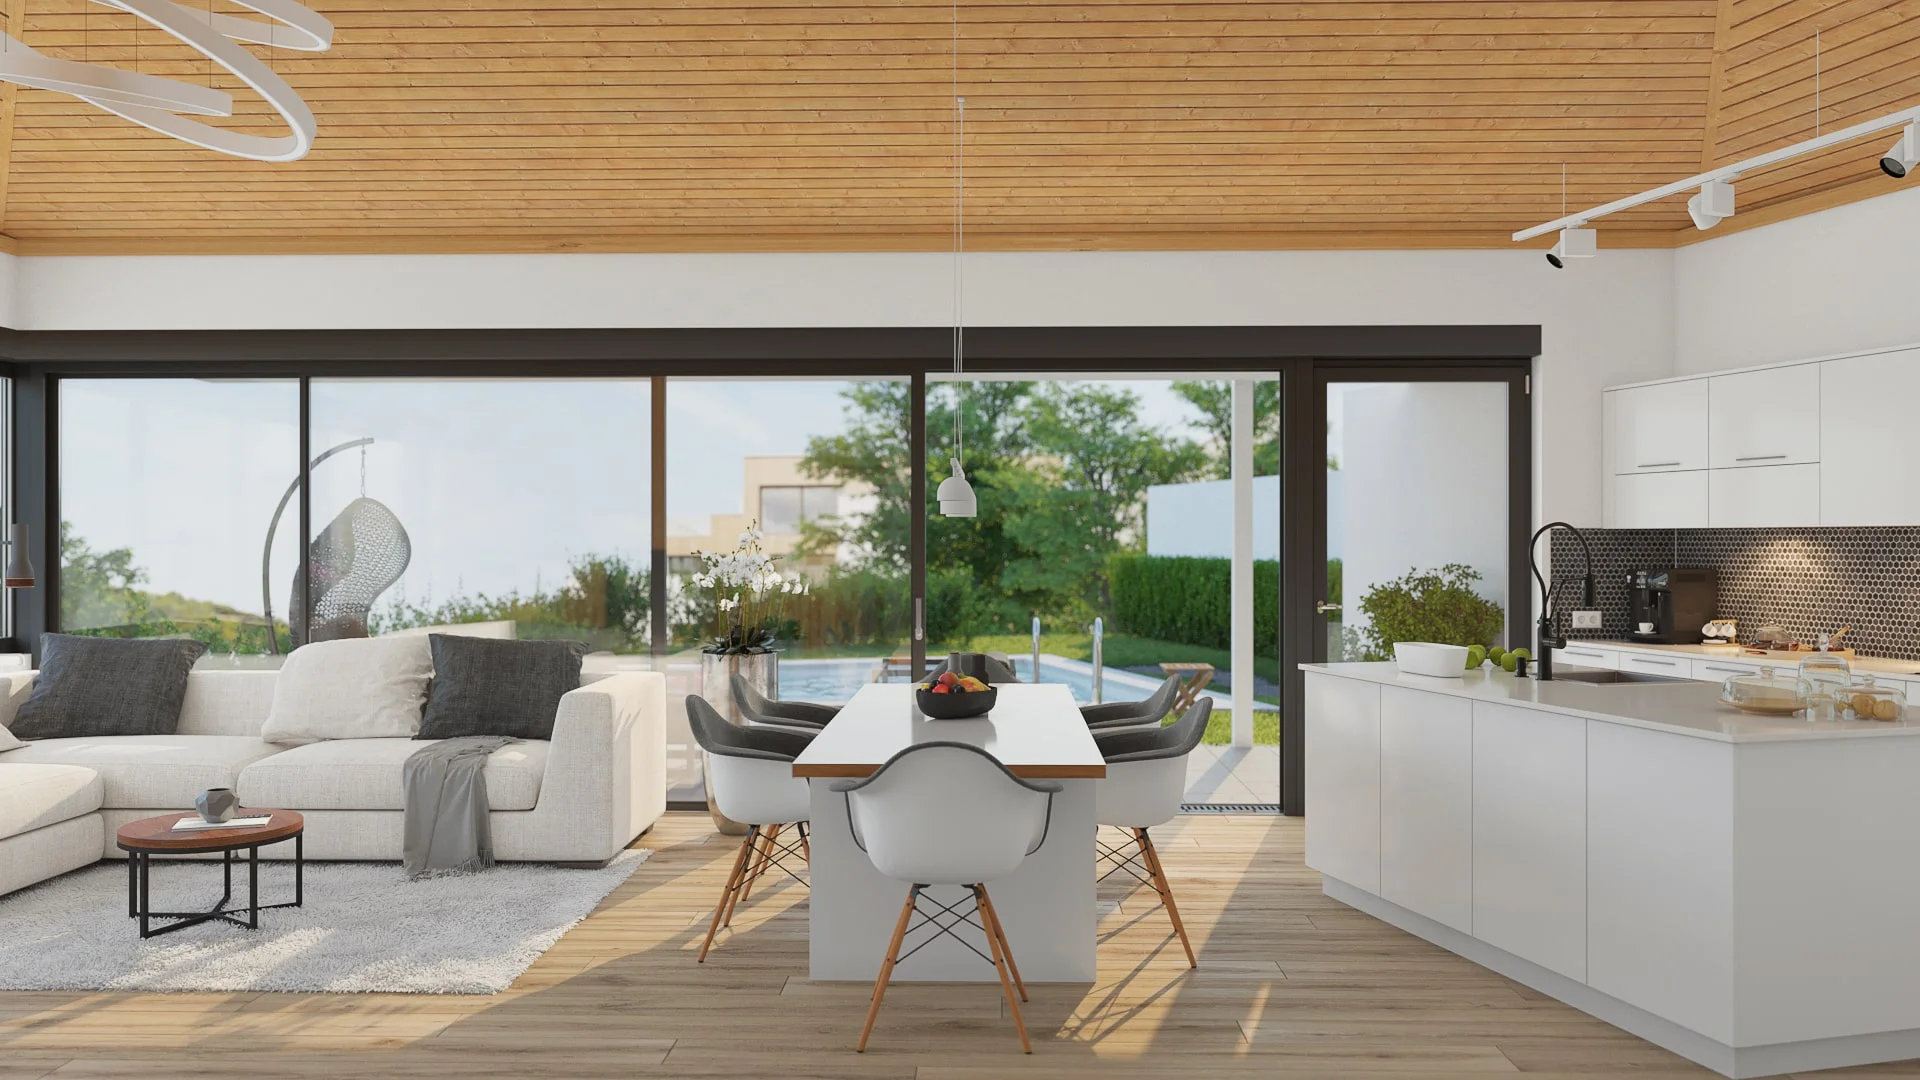 Architectural visualization. Detached house. Living/dining